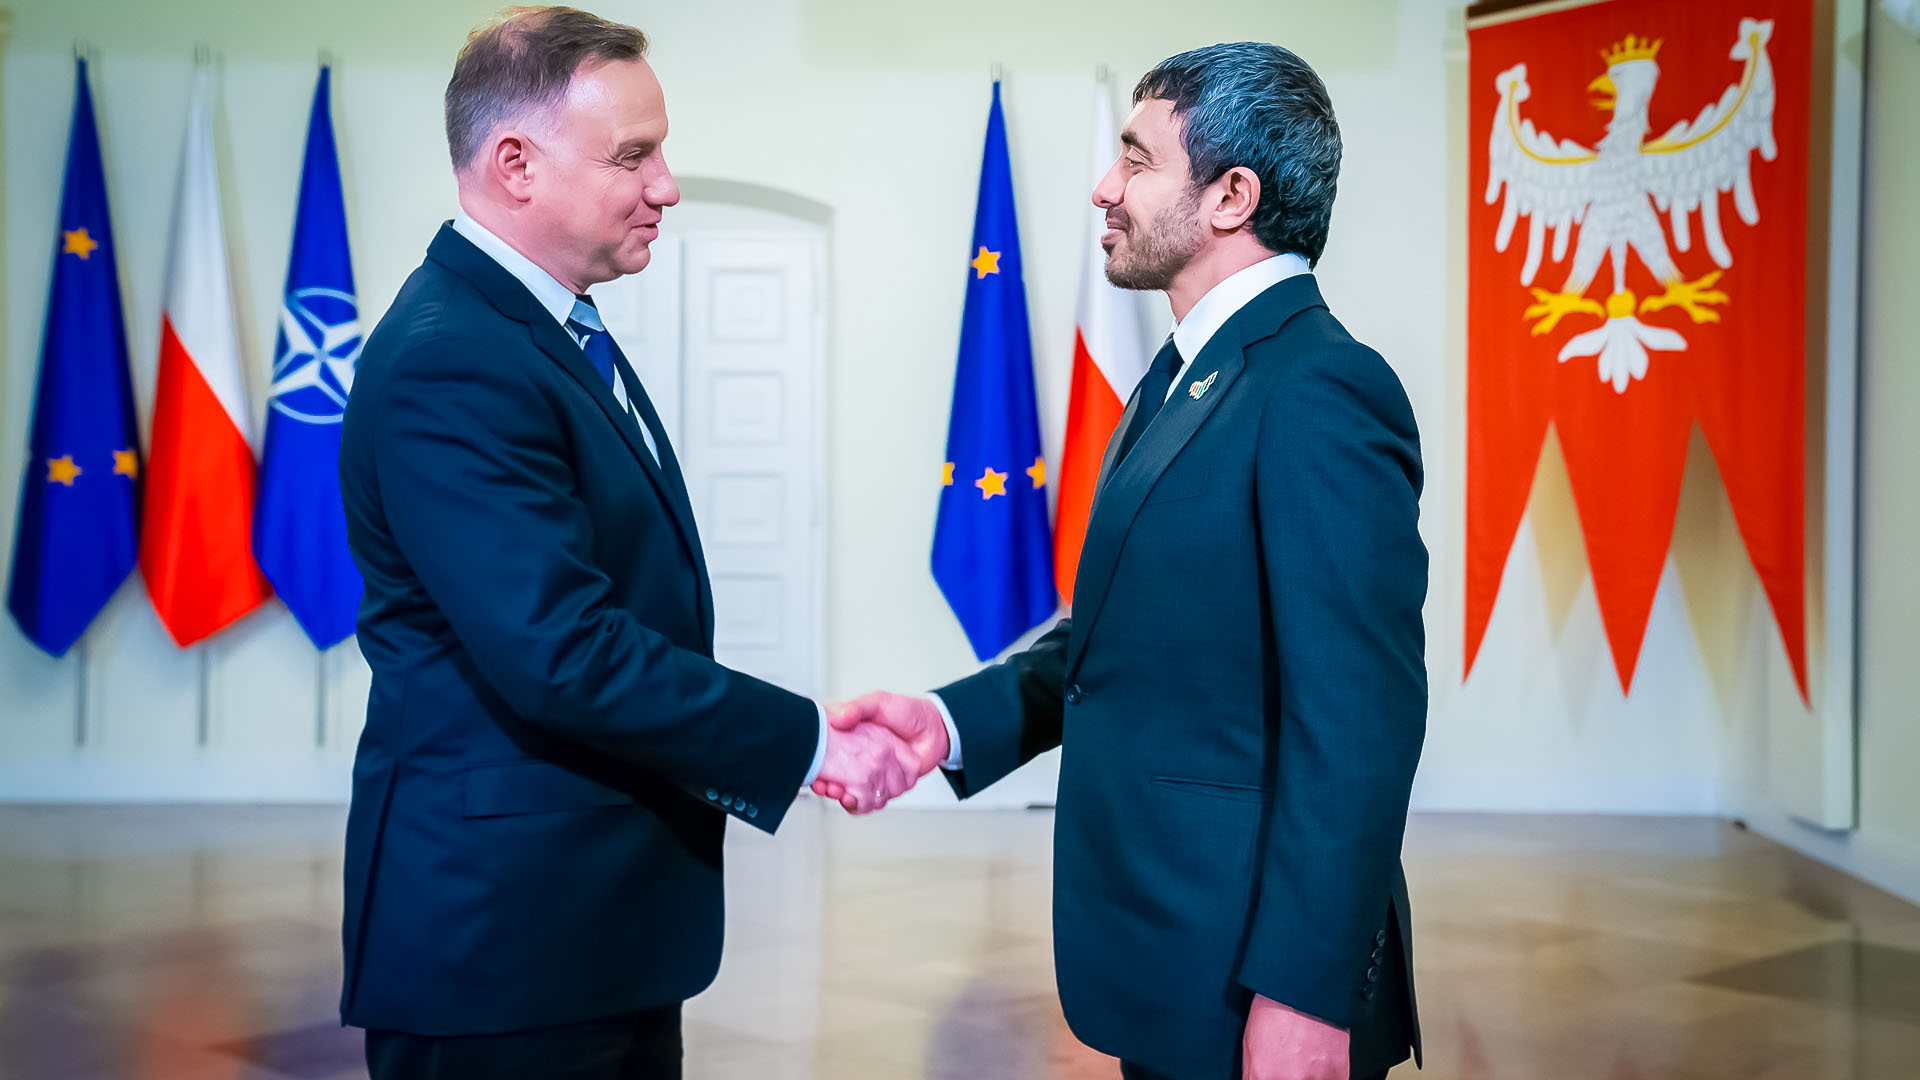 President of Poland meets with UAE Foreign Minister